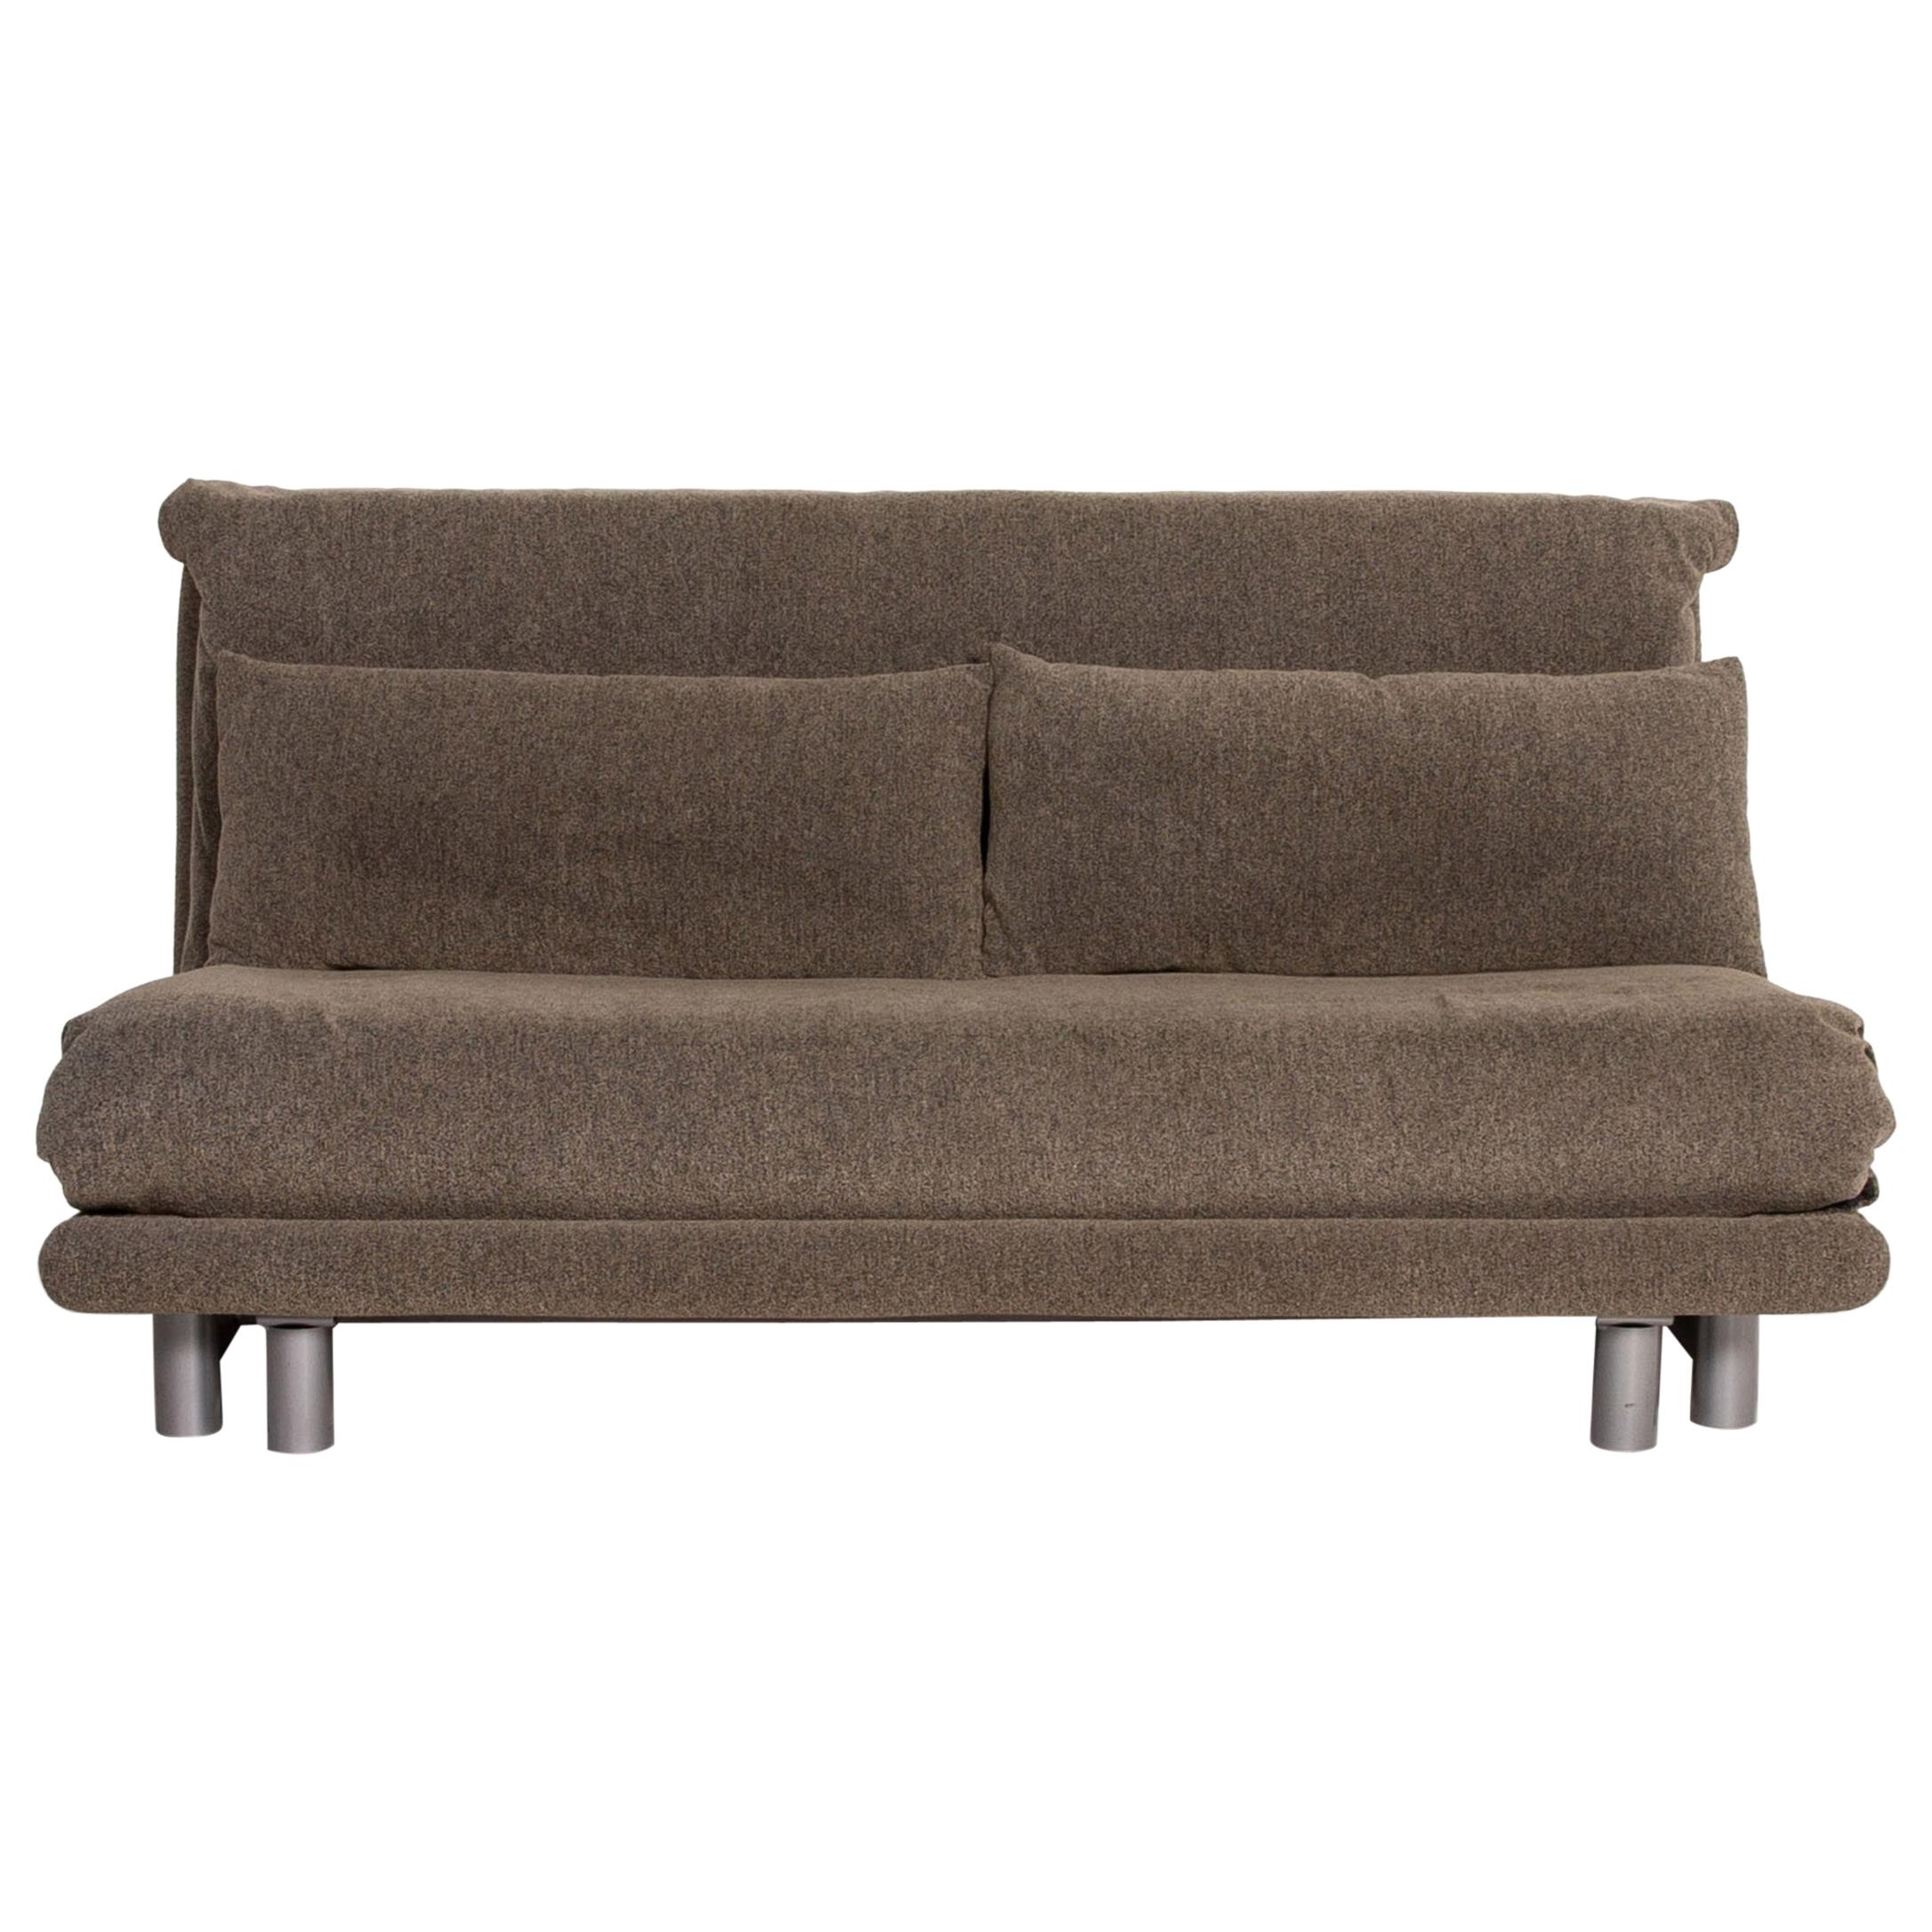 Ligne Roset Multy Fabric Sofa Bed Gray Gray Green Three-Seat Sofa Function For Sale